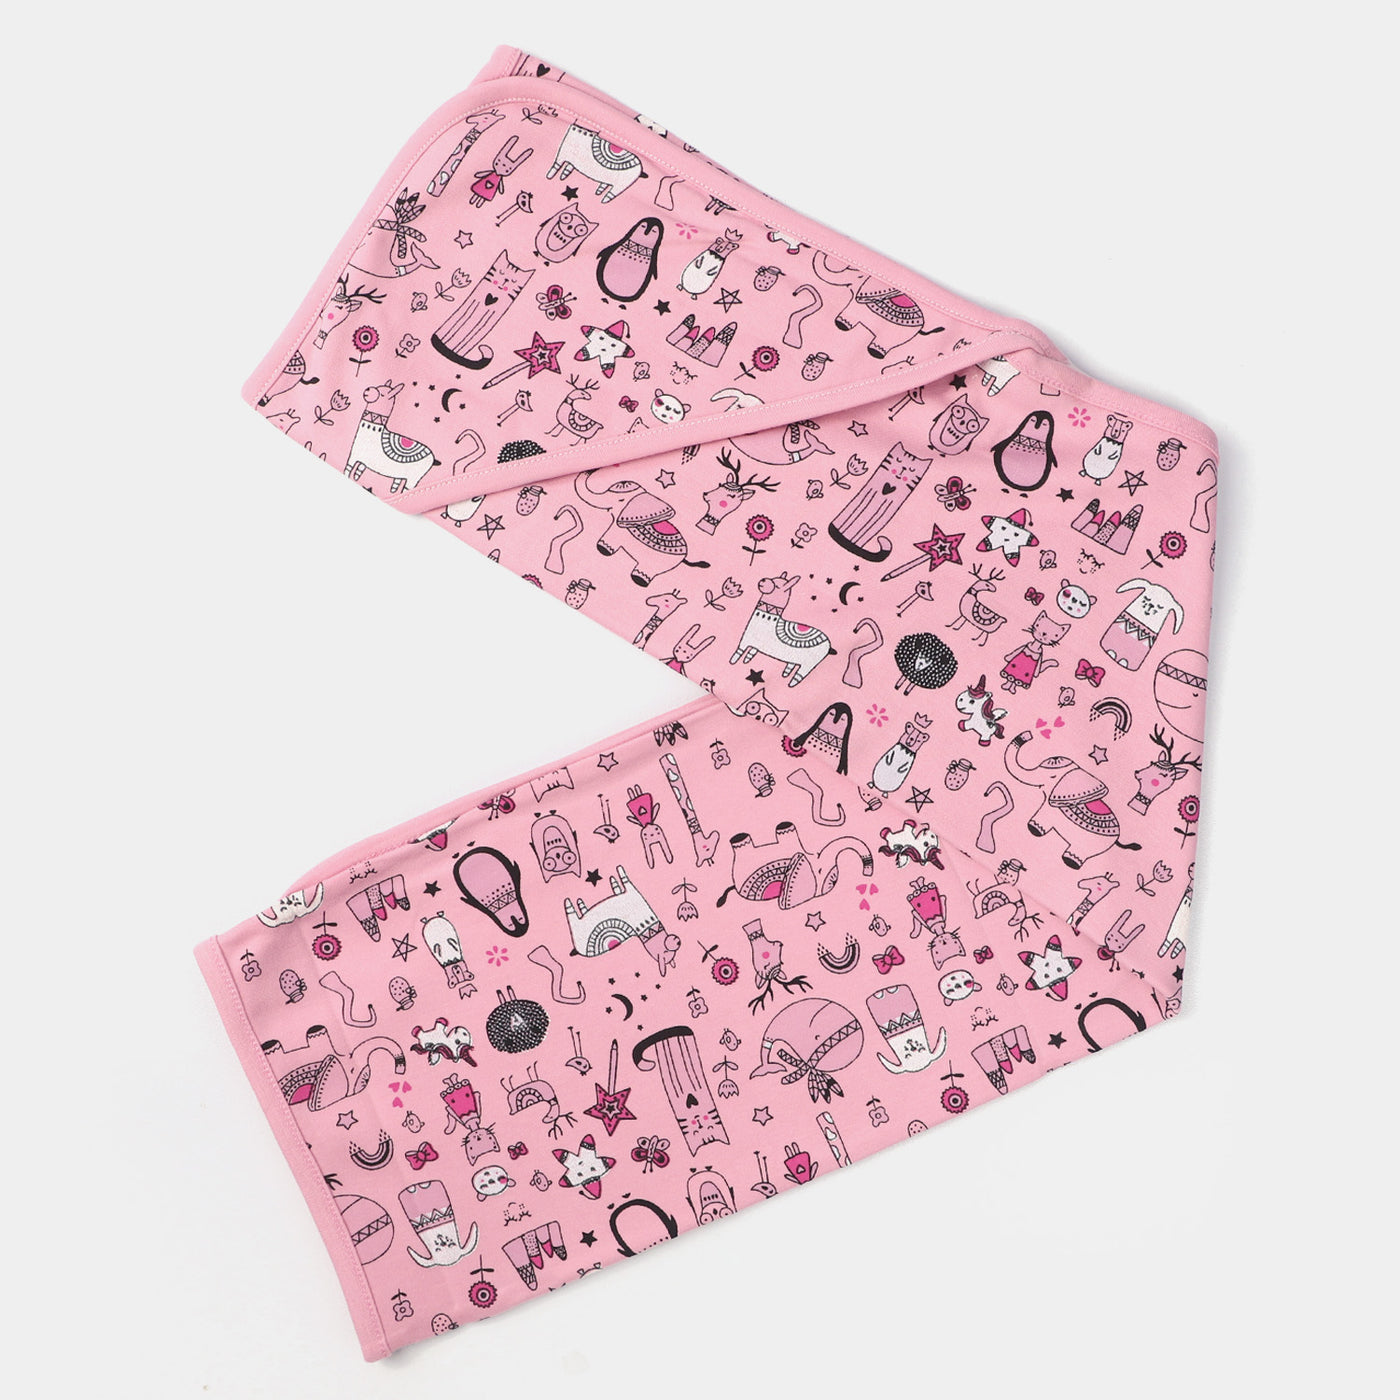 Infant Printed Wrapping Sheet | Pink